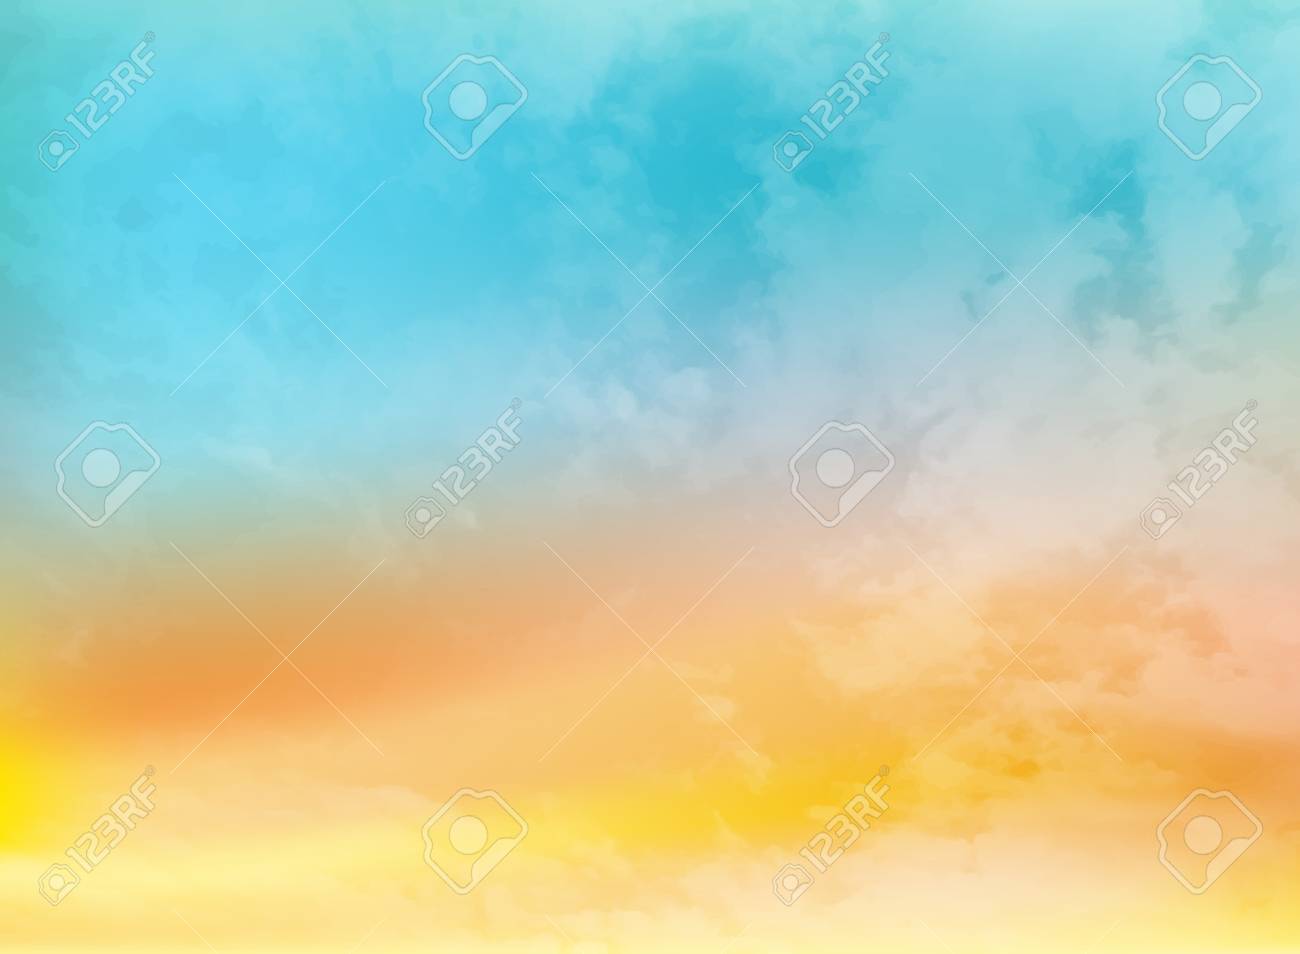 Abstract Color Summer Background Vector Illustration Royalty